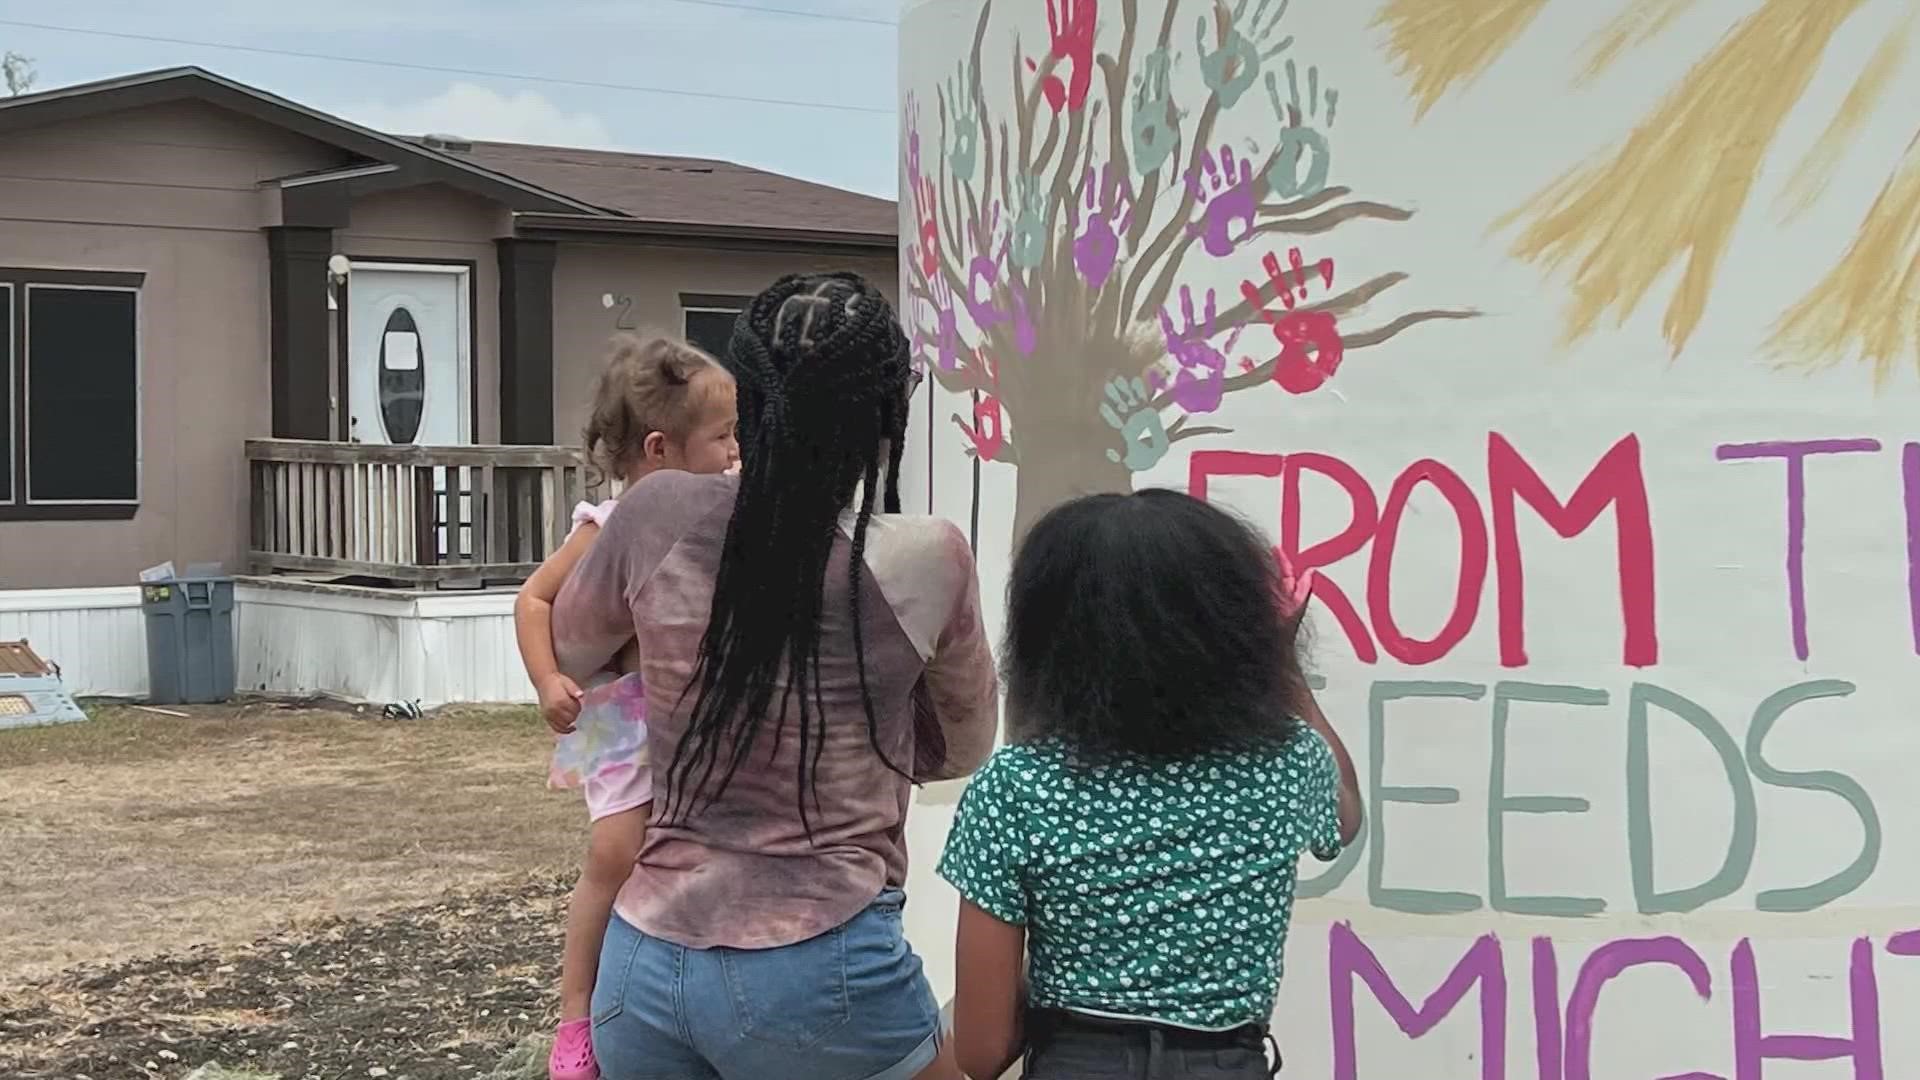 TruLight127 Ministries typically cares for 35 foster kids in the San Antonio area, but they've had to reduce that number.